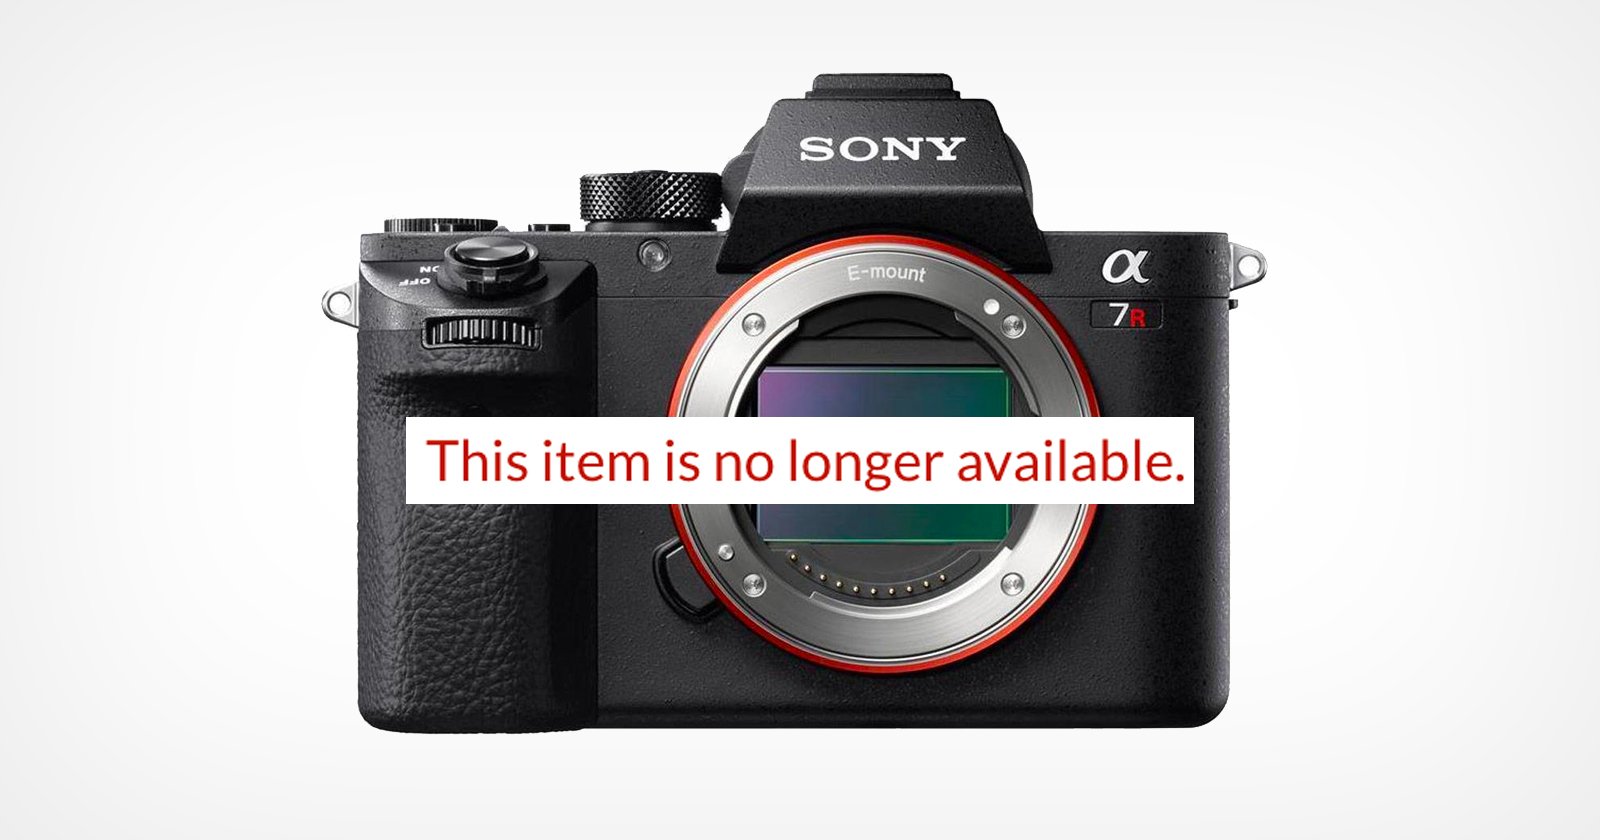 Sony Alpha 7R II Finally Discontinued After |